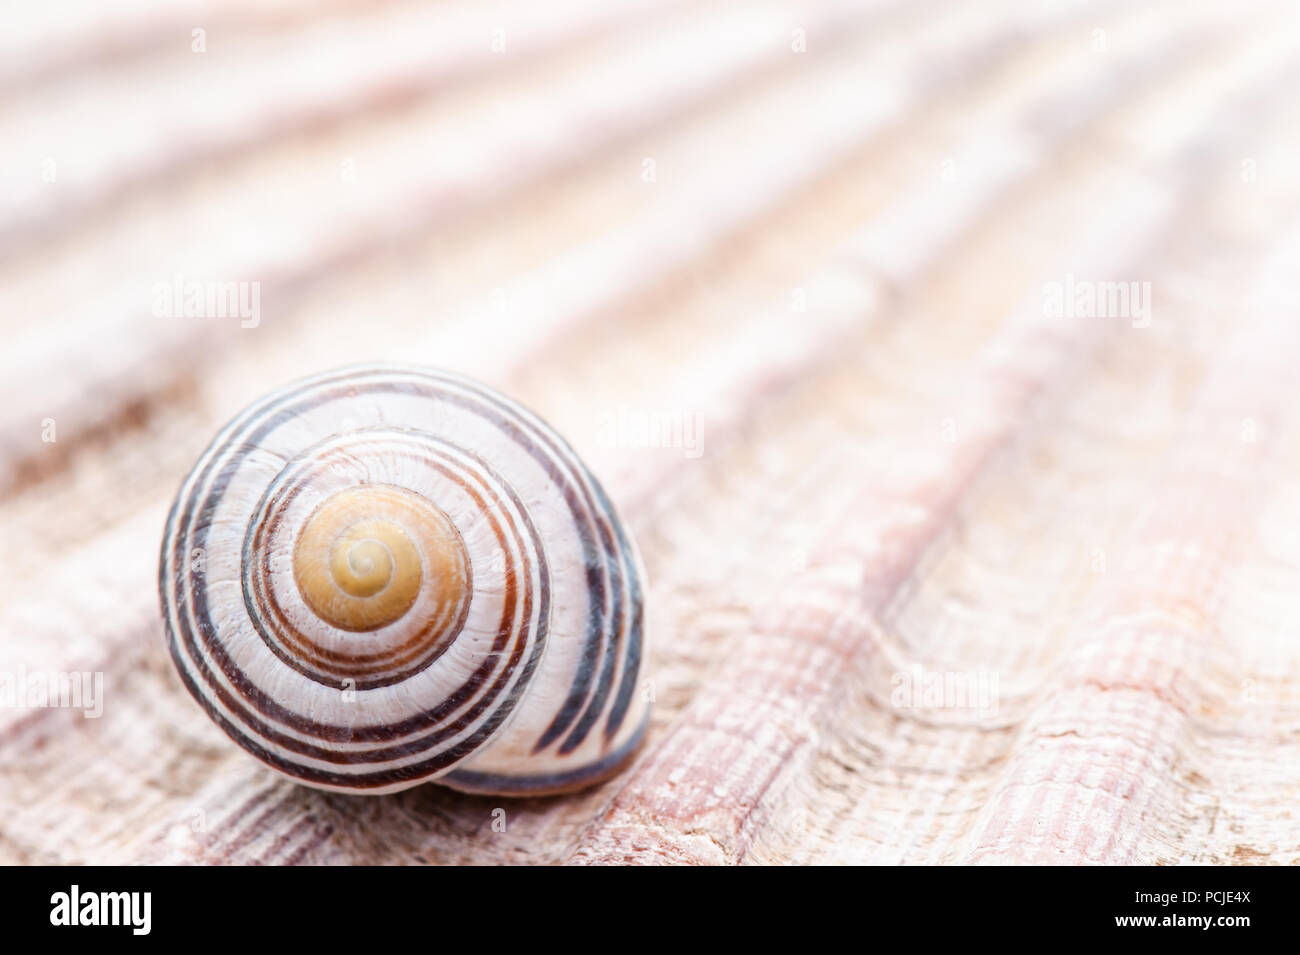 Contrast between the spiralling pattern of a snail shell and the converging straight lines of a great scallop shell vanishing towards the top right Stock Photo